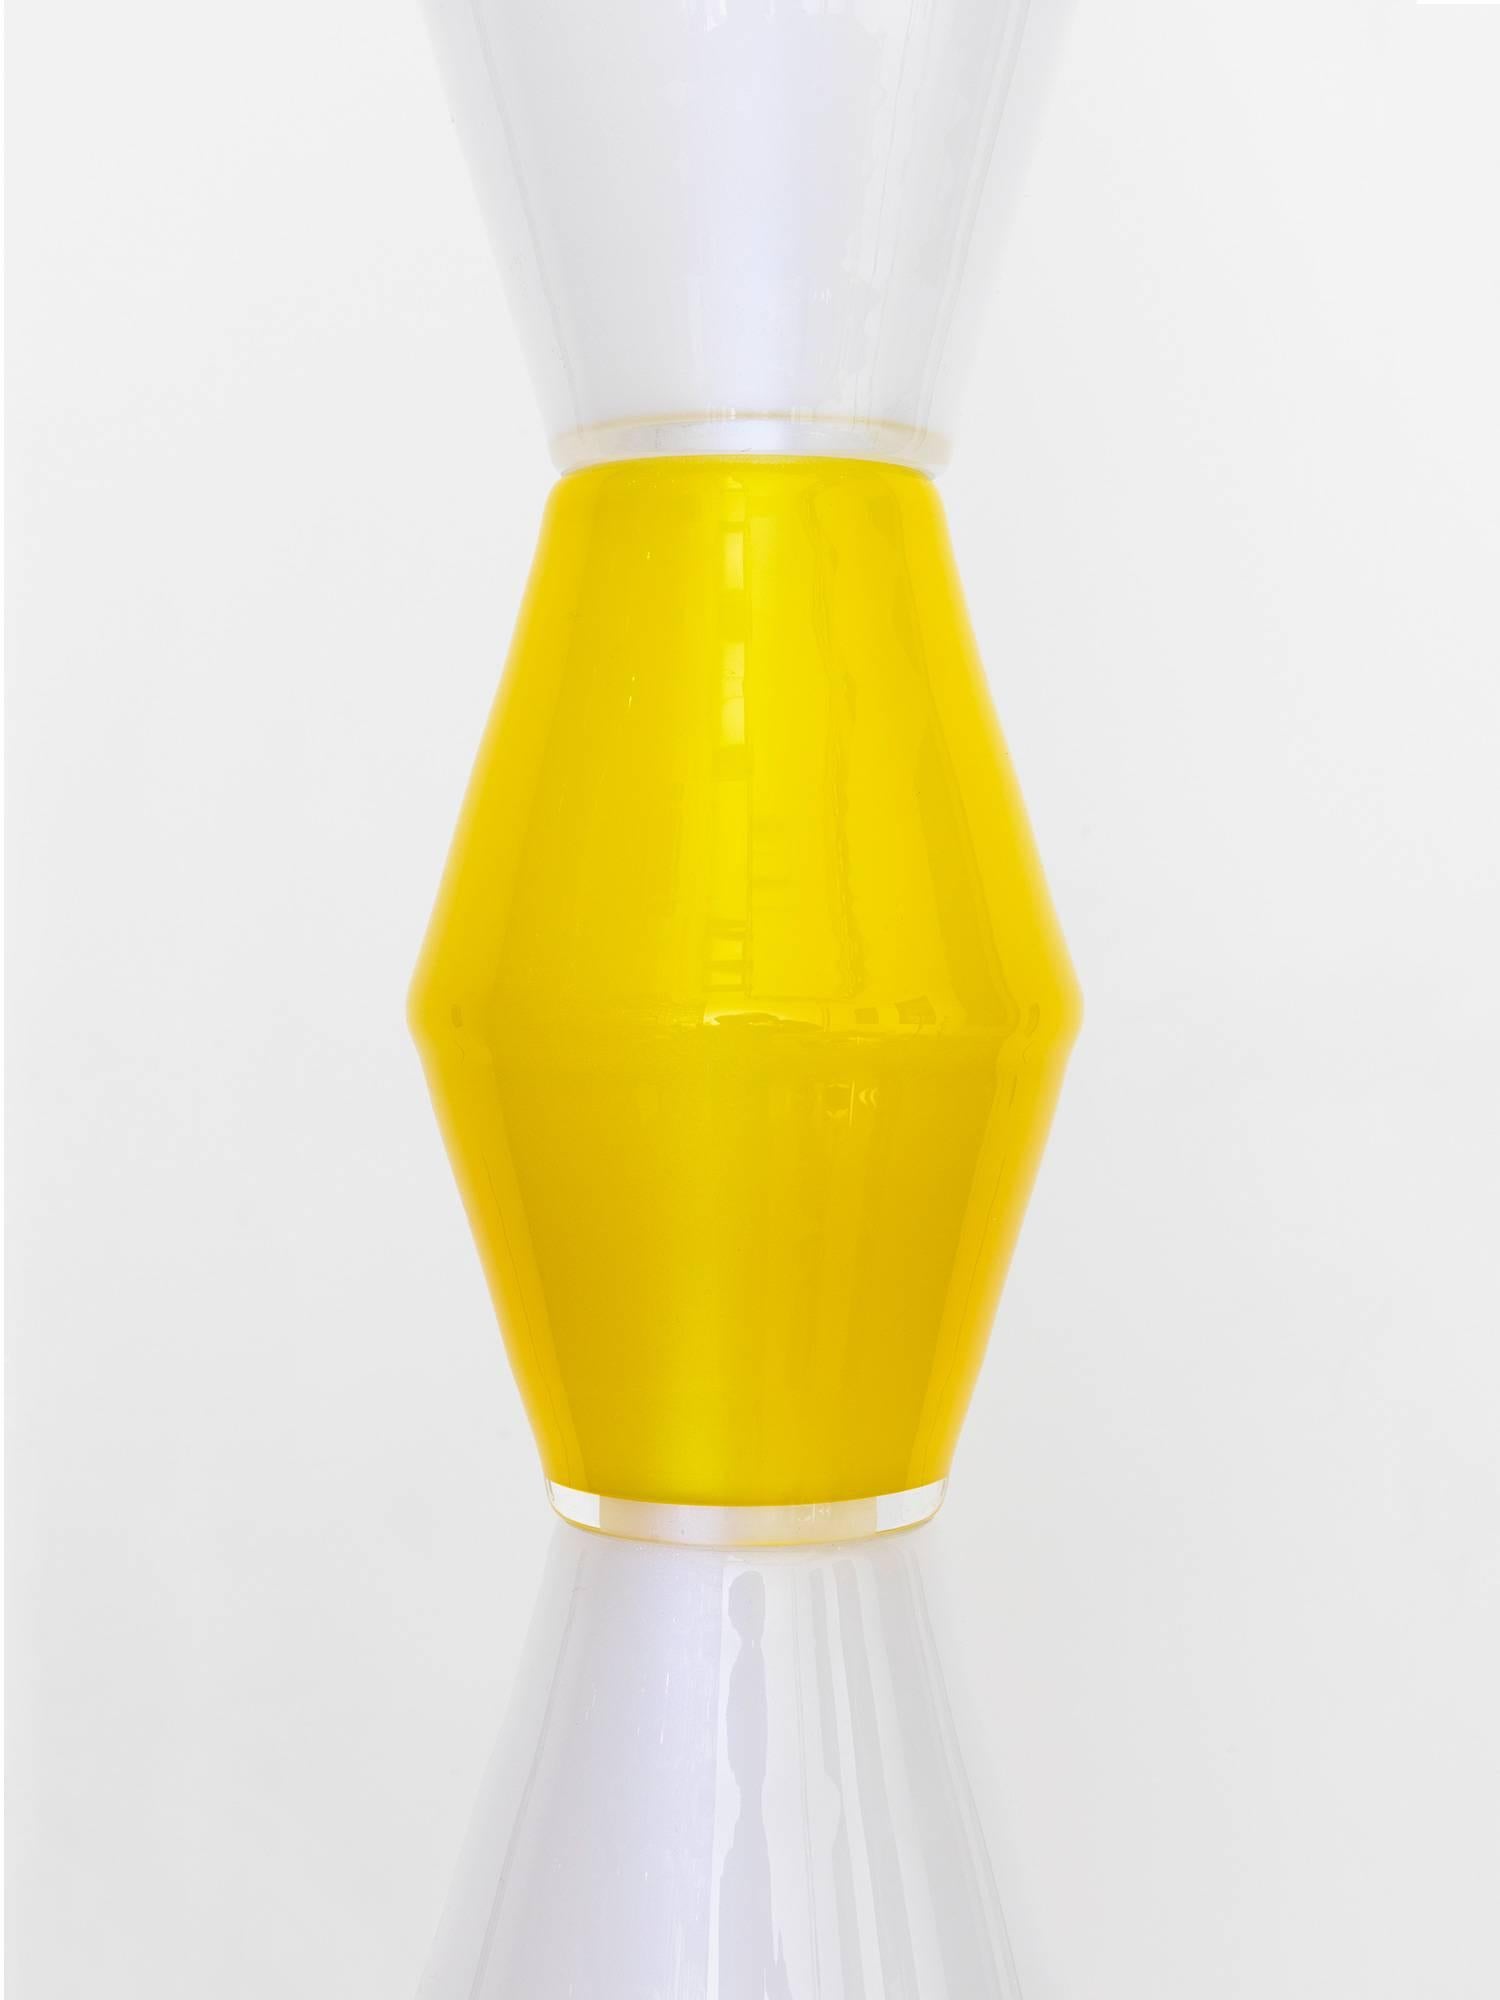 Handcrafted, totemic glass hanging light by Norwegian artist/architect Tron Meyer. The lamp is made of 11 yellow and white glass shapes strung around an LED core, which were hand-blown into a traditional wooden mold in a 200-year-old glass studio in